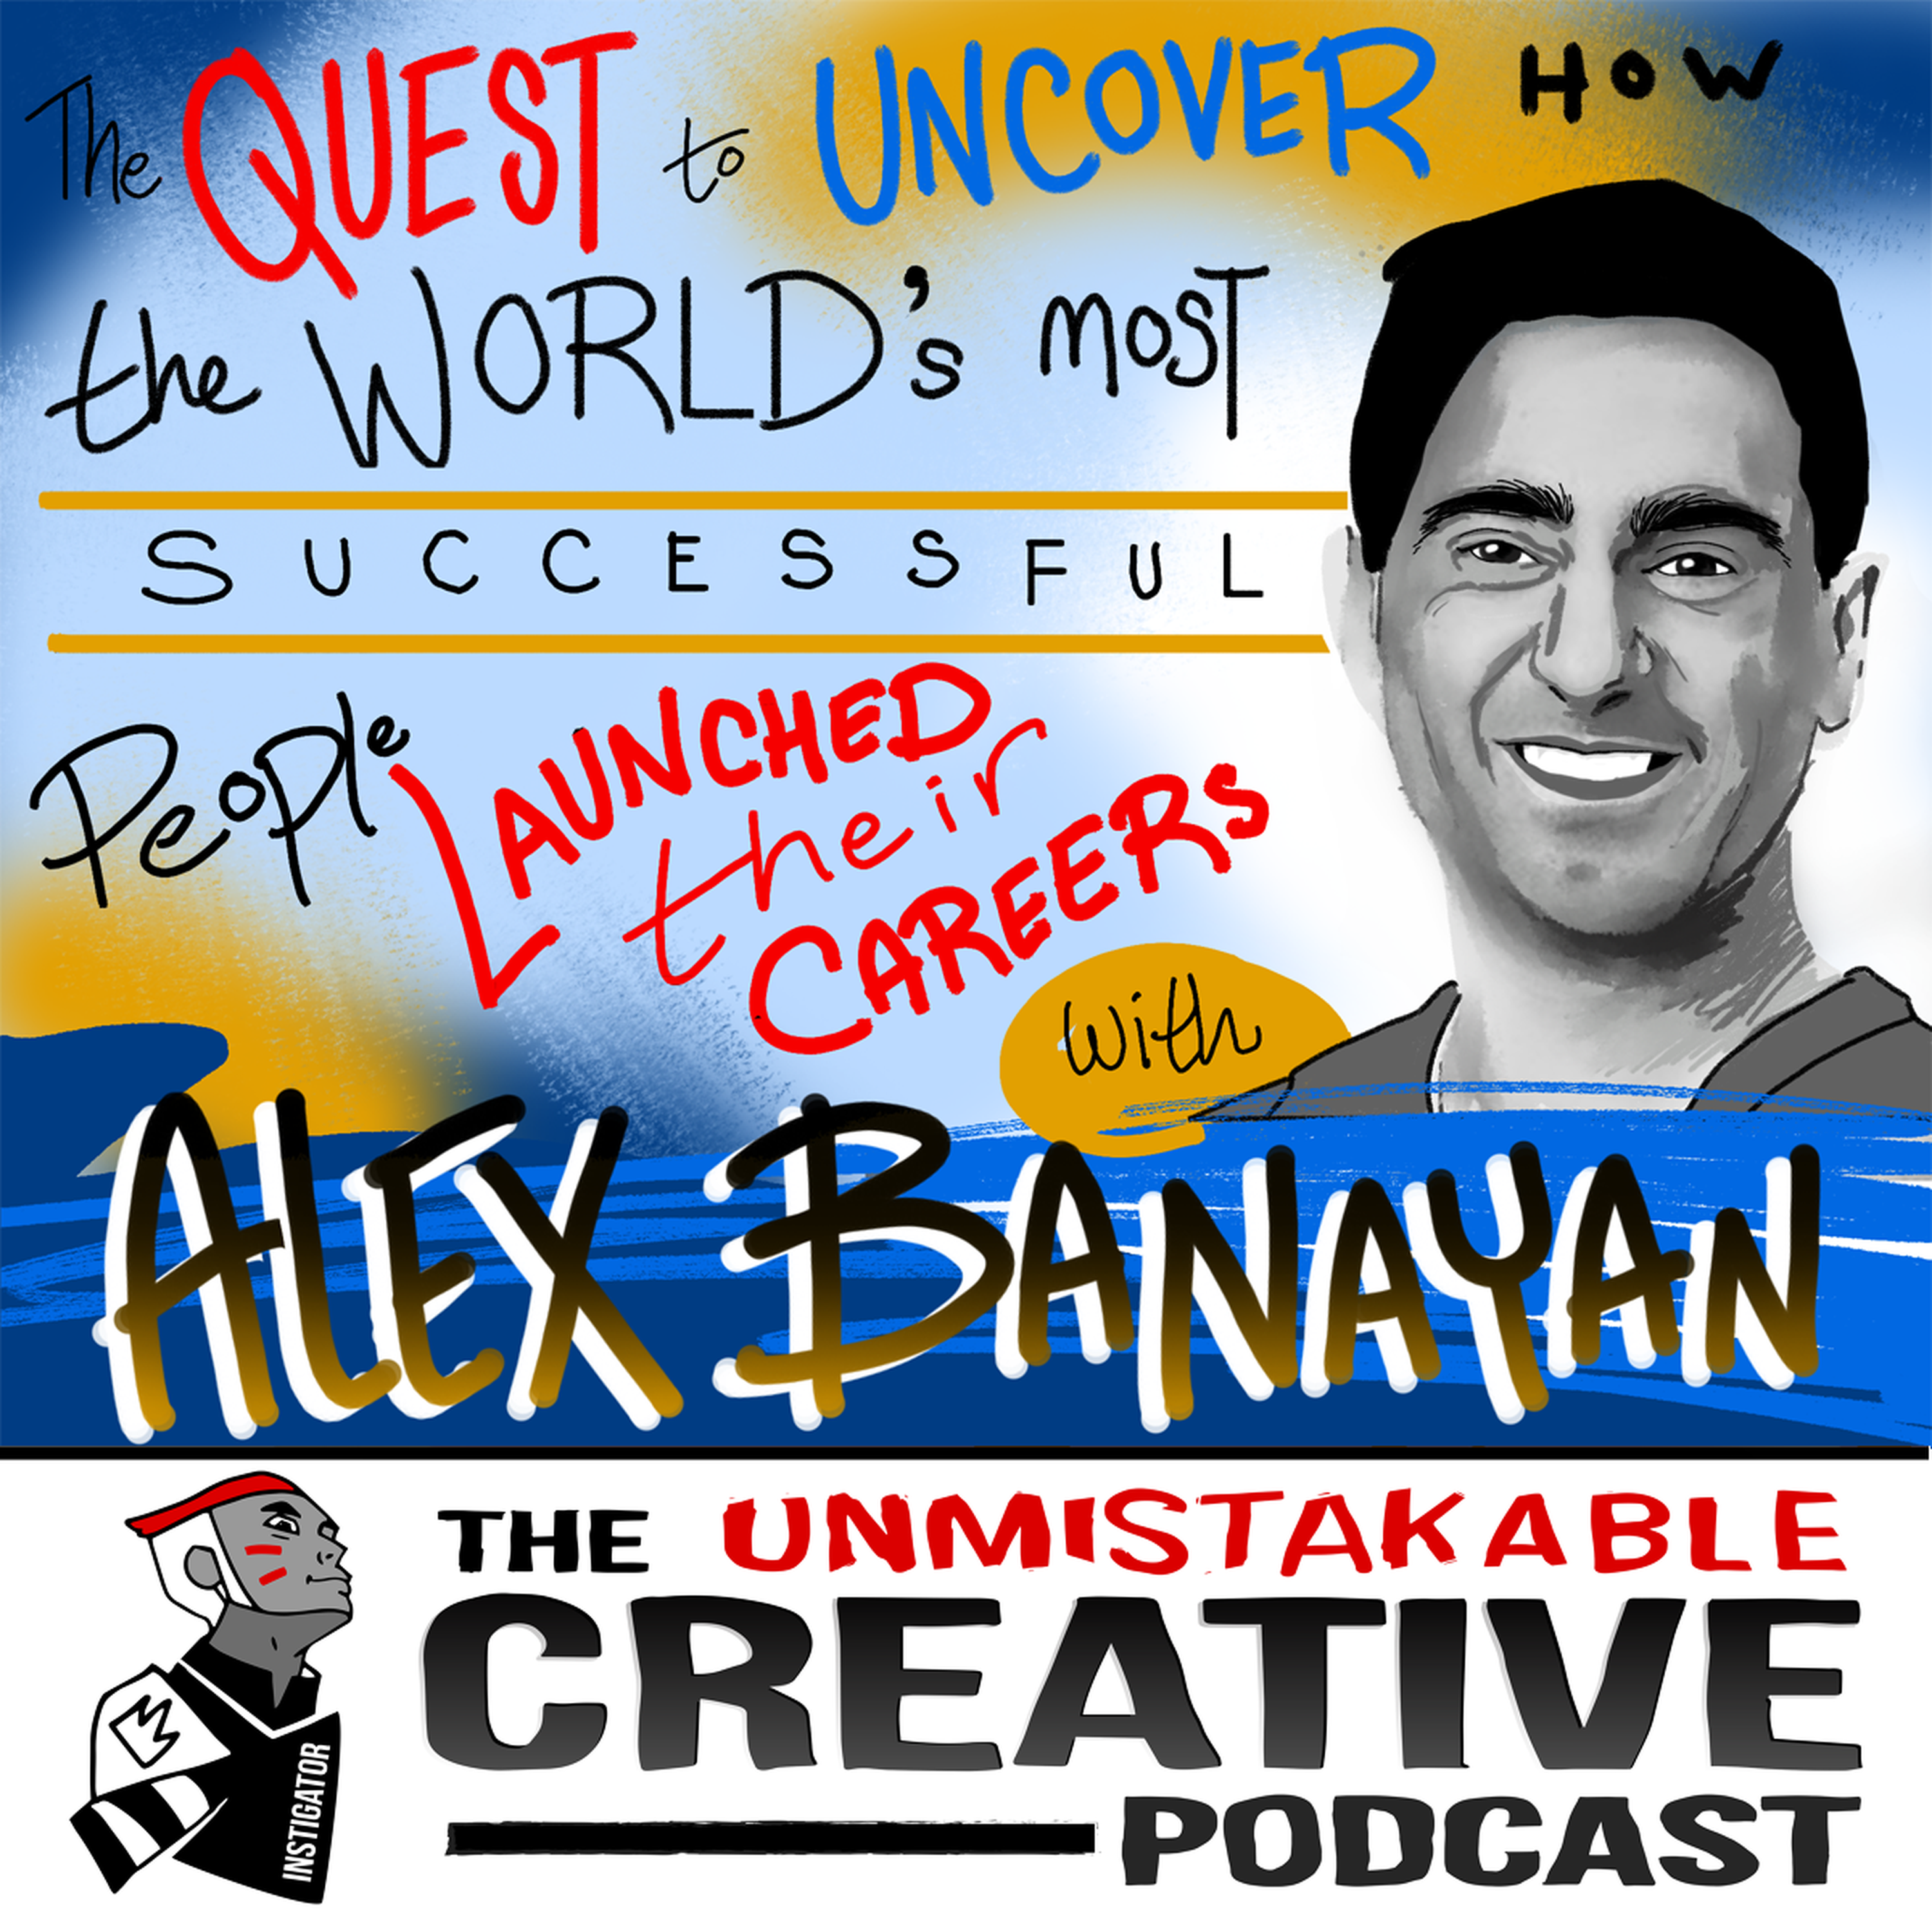 Best of: The Quest to Uncover How the World’s Most Successful People Launched Their Careers with Alex Banayan